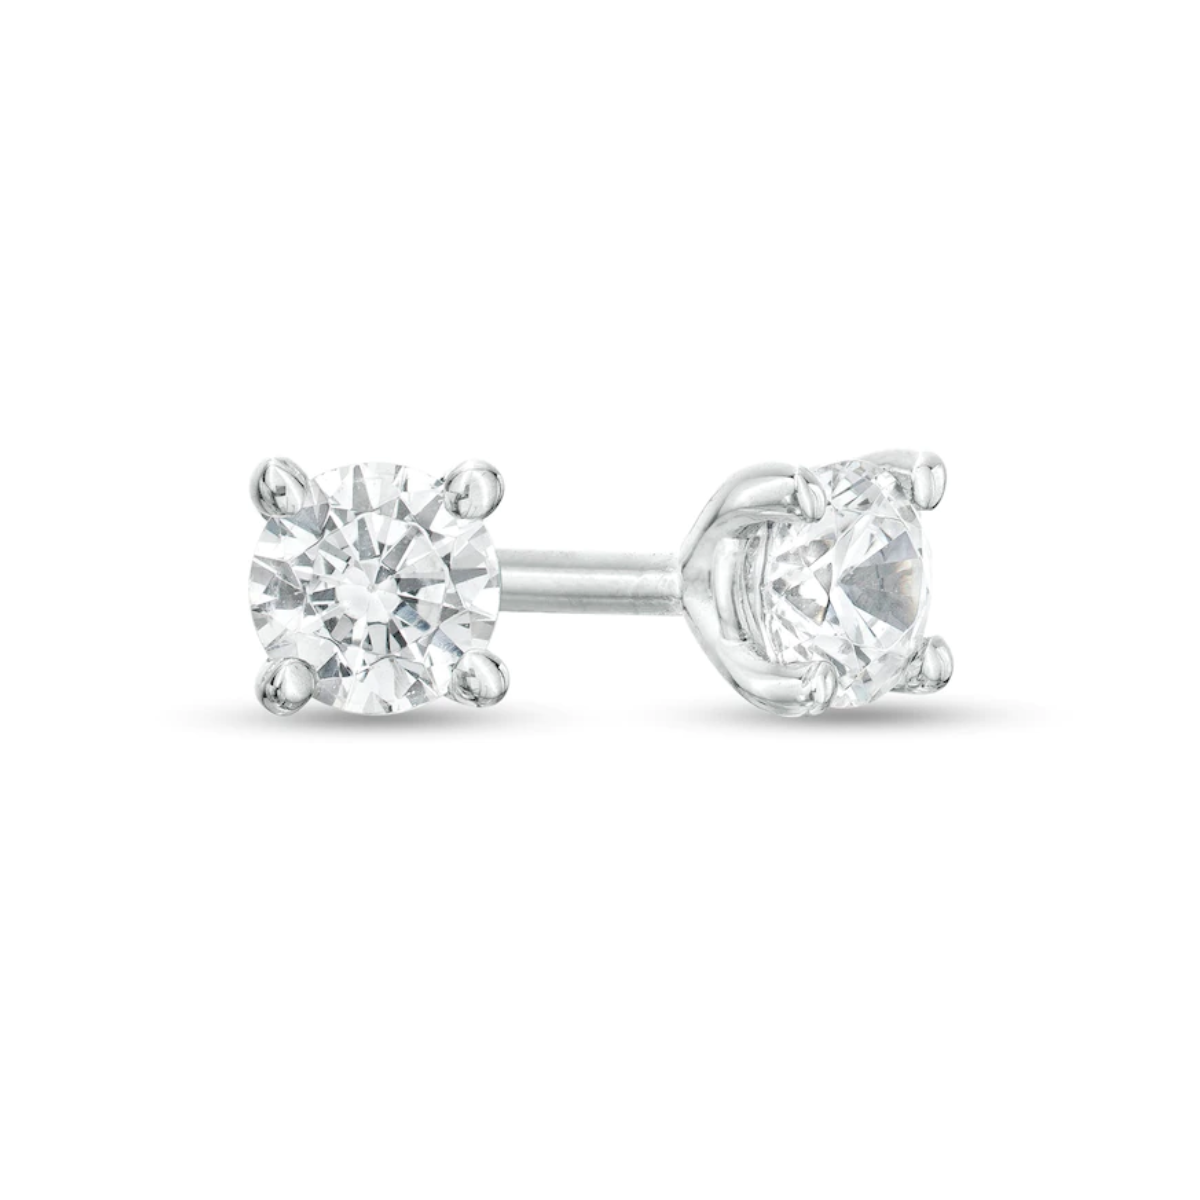 20. Sparkle and Love: Celebrate 7 Years with Stunning Diamond Stud Earrings